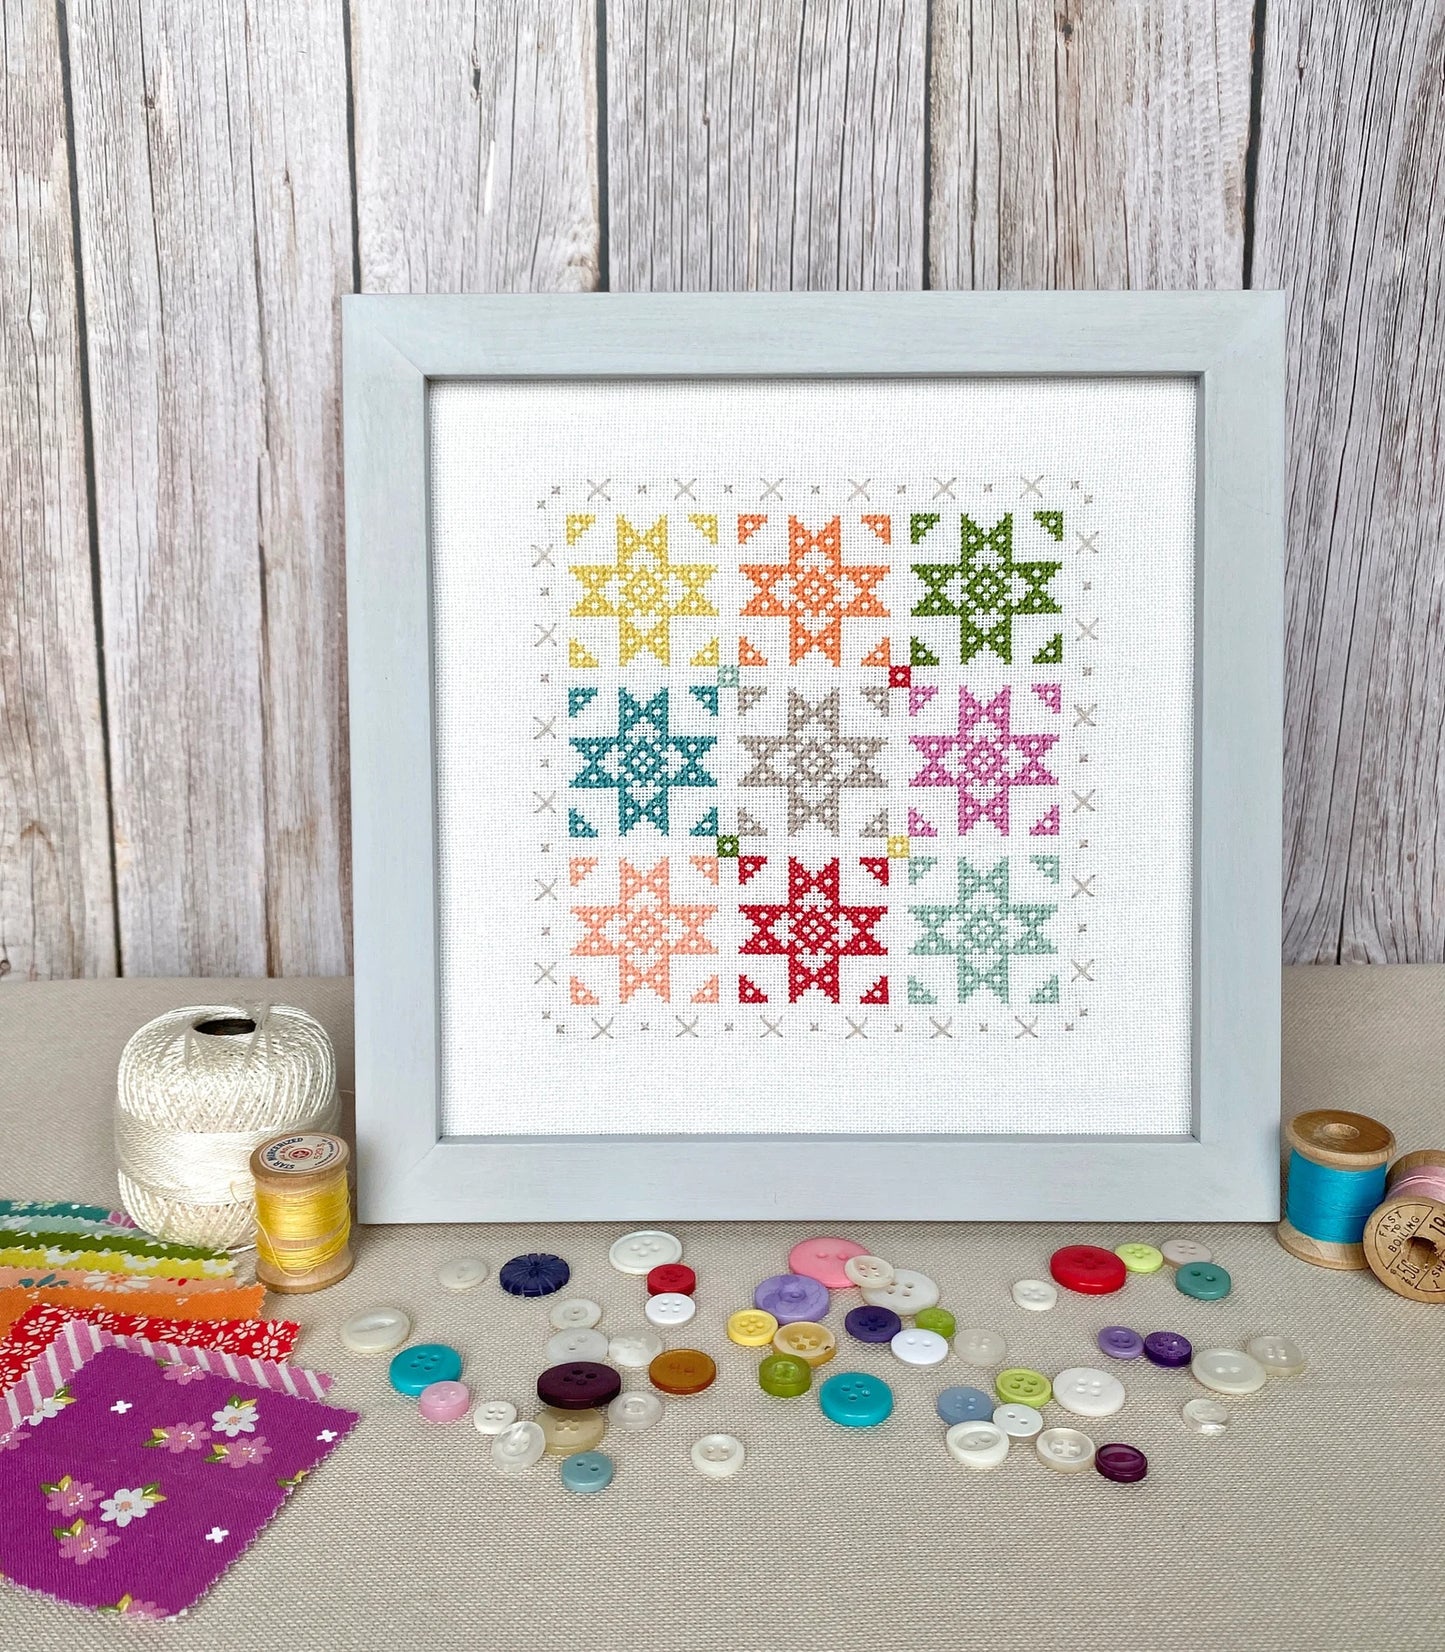 Shine Mini Cross Stitch Pattern by Count Your Stitches Designs